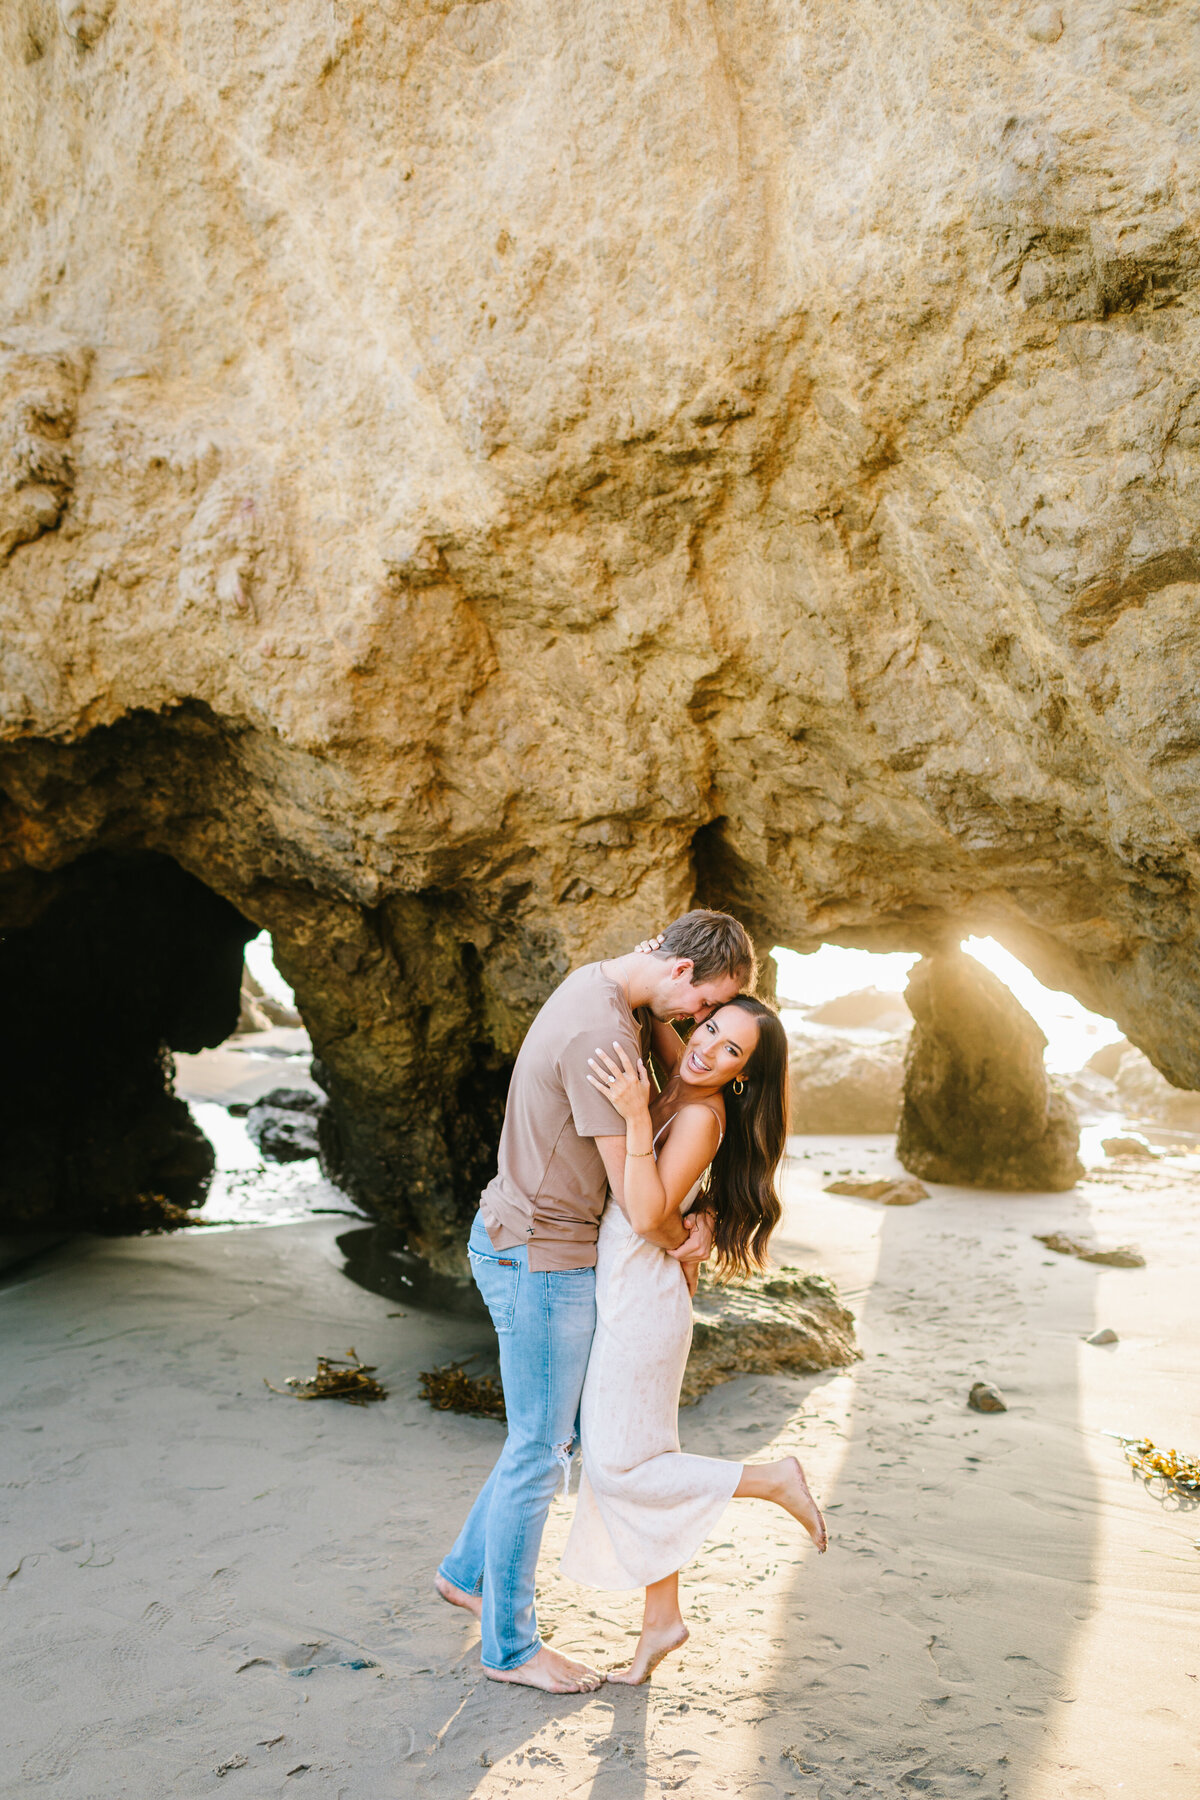 Best California and Texas Engagement Photographer-Jodee Debes Photography-117